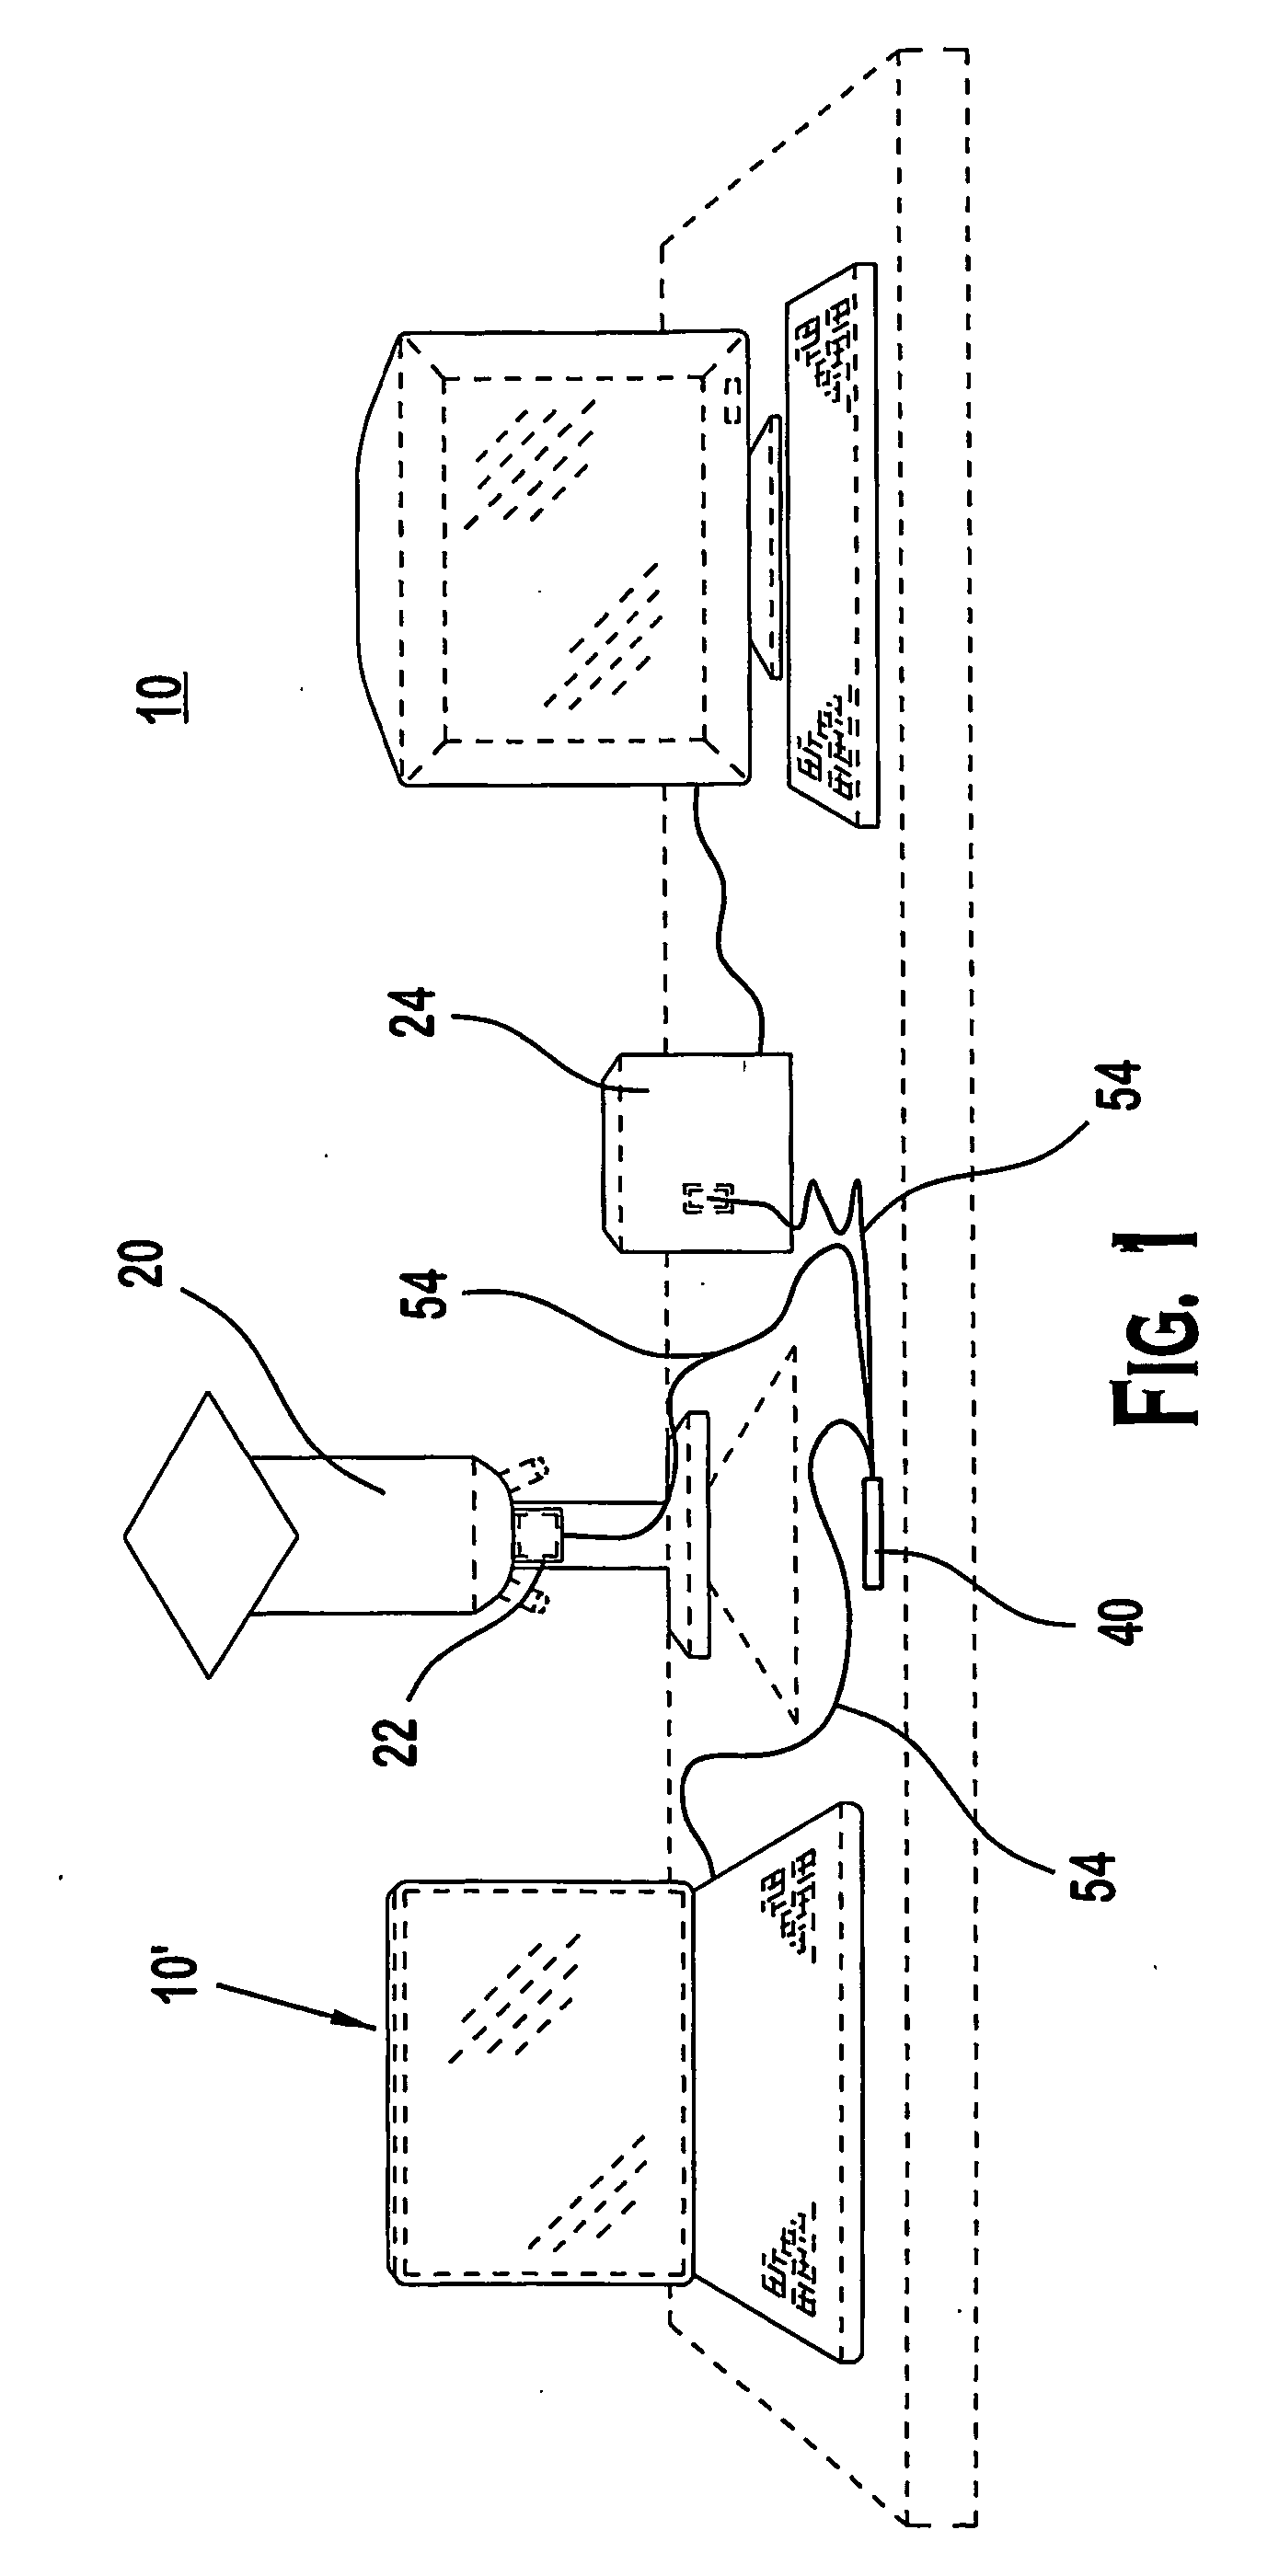 Miniature confocal optical device, system, and method